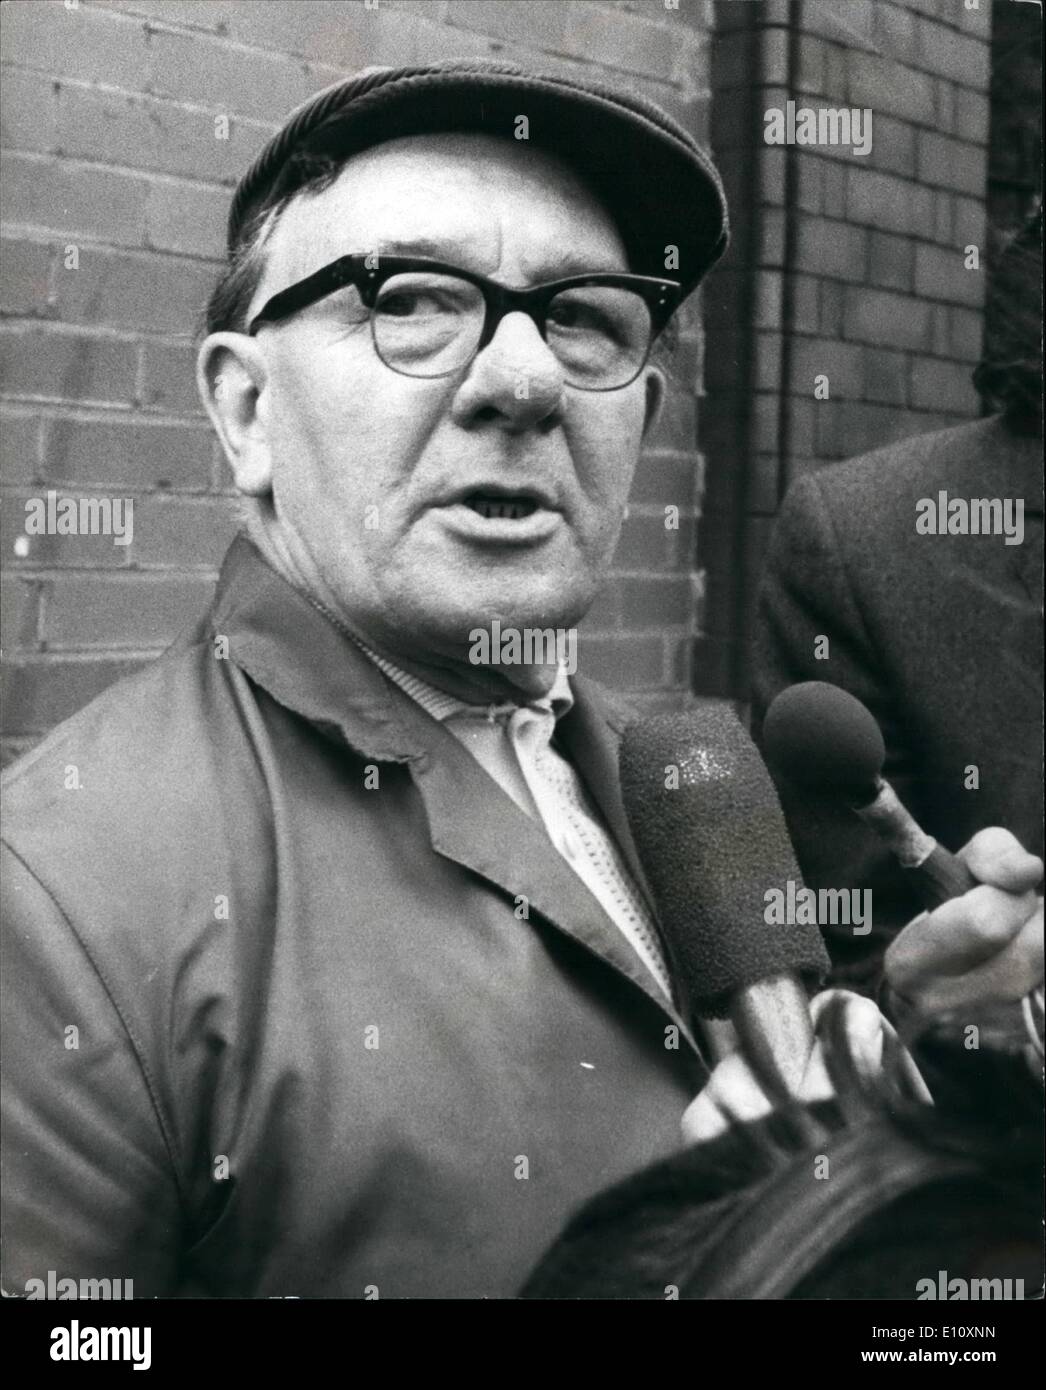 Aug. 08, 1974 - He Faces More Silence From Workmates.: For three and half years, union rebel Tommy Seddon has been snubbed by his workmates - ever since December 1970, when he refused to join a protest strike against the Industrial Relations Bill. Now it seems that Tommy must face the silence until he retires in 1978, after workmates at an engineering firm in Hulme, Manchester, where Tommy is a fitter, turned a deaf ear to a court order that hey should talk to him again. His workmates ignored a the deadline for the Industrial Relation Court ruling made on July 22 Stock Photo